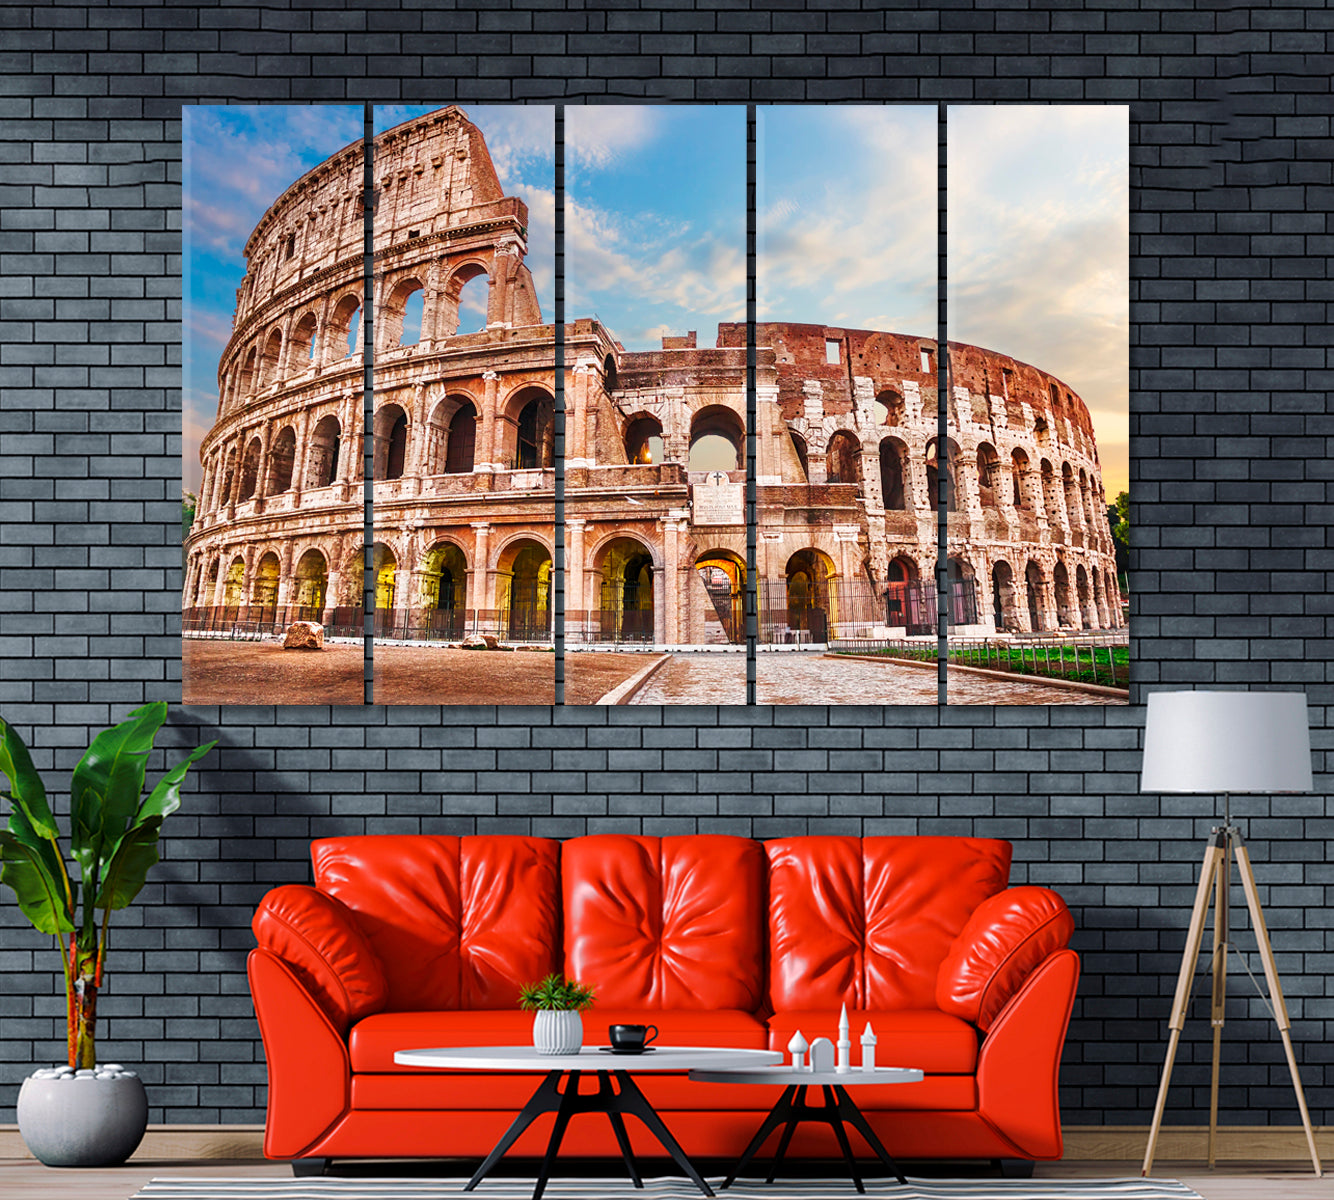 Roman Colosseum Italy Canvas Print ArtLexy 5 Panels 36"x24" inches 